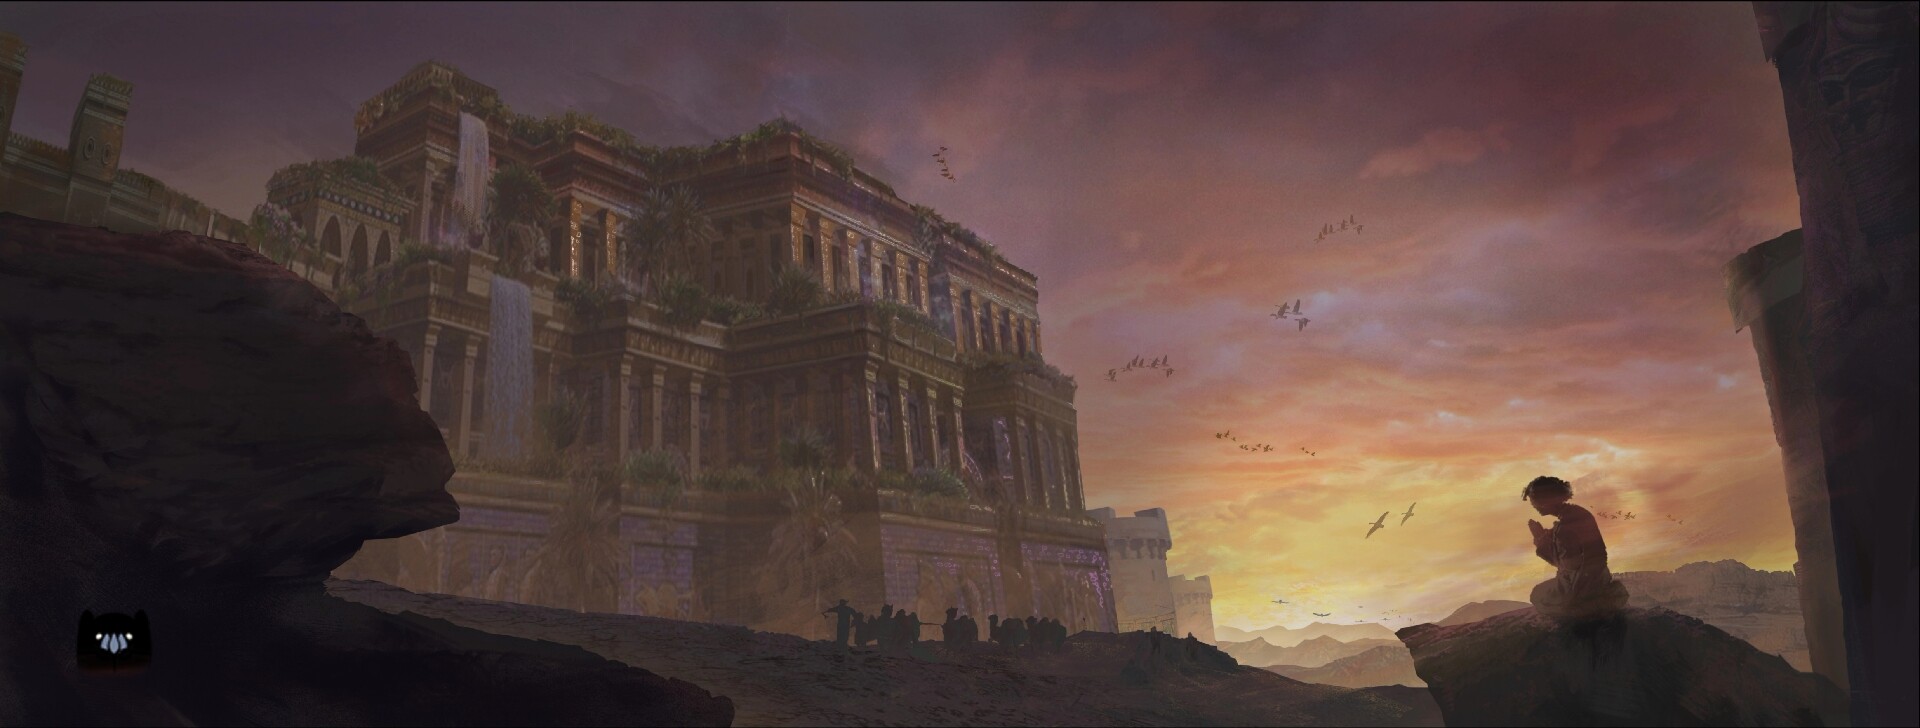 ArtStation - The Babylonian palace lost in the desert